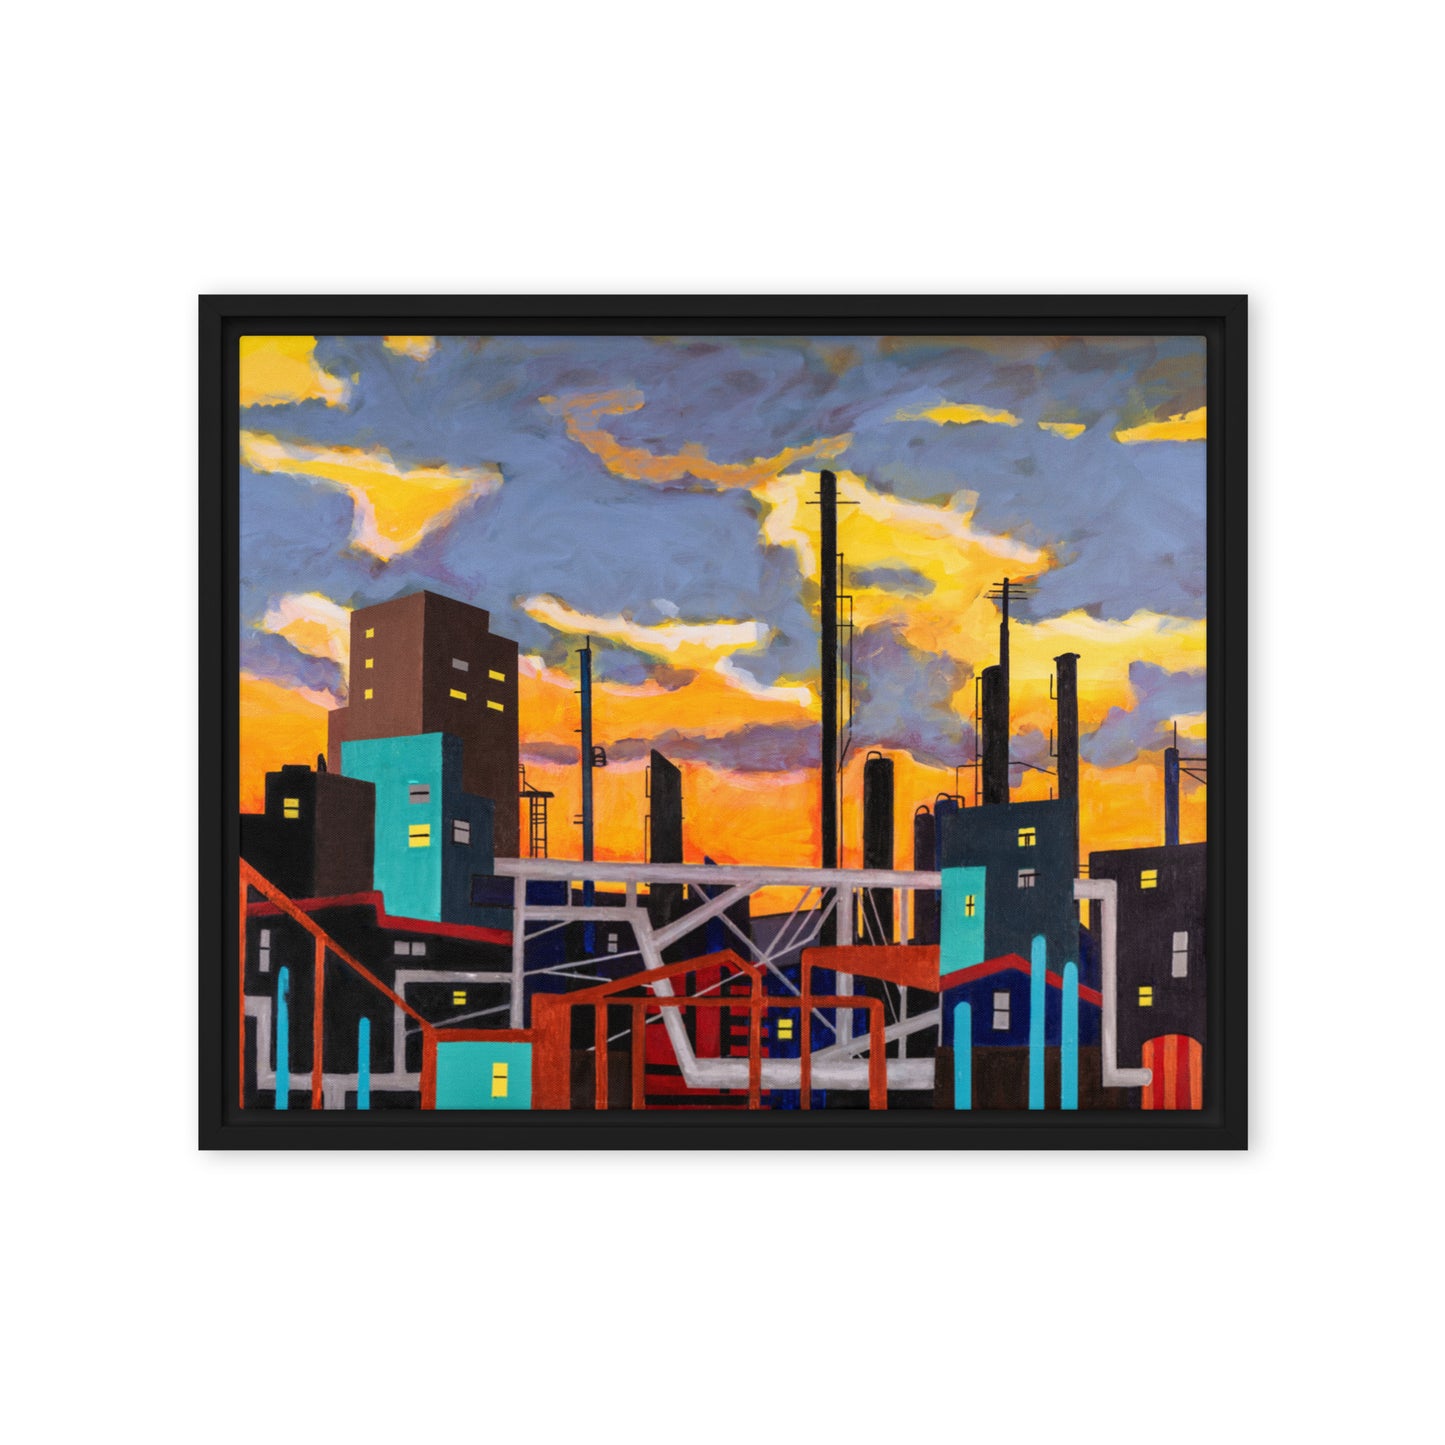 Industrial City with Wild Sky- Framed canvas